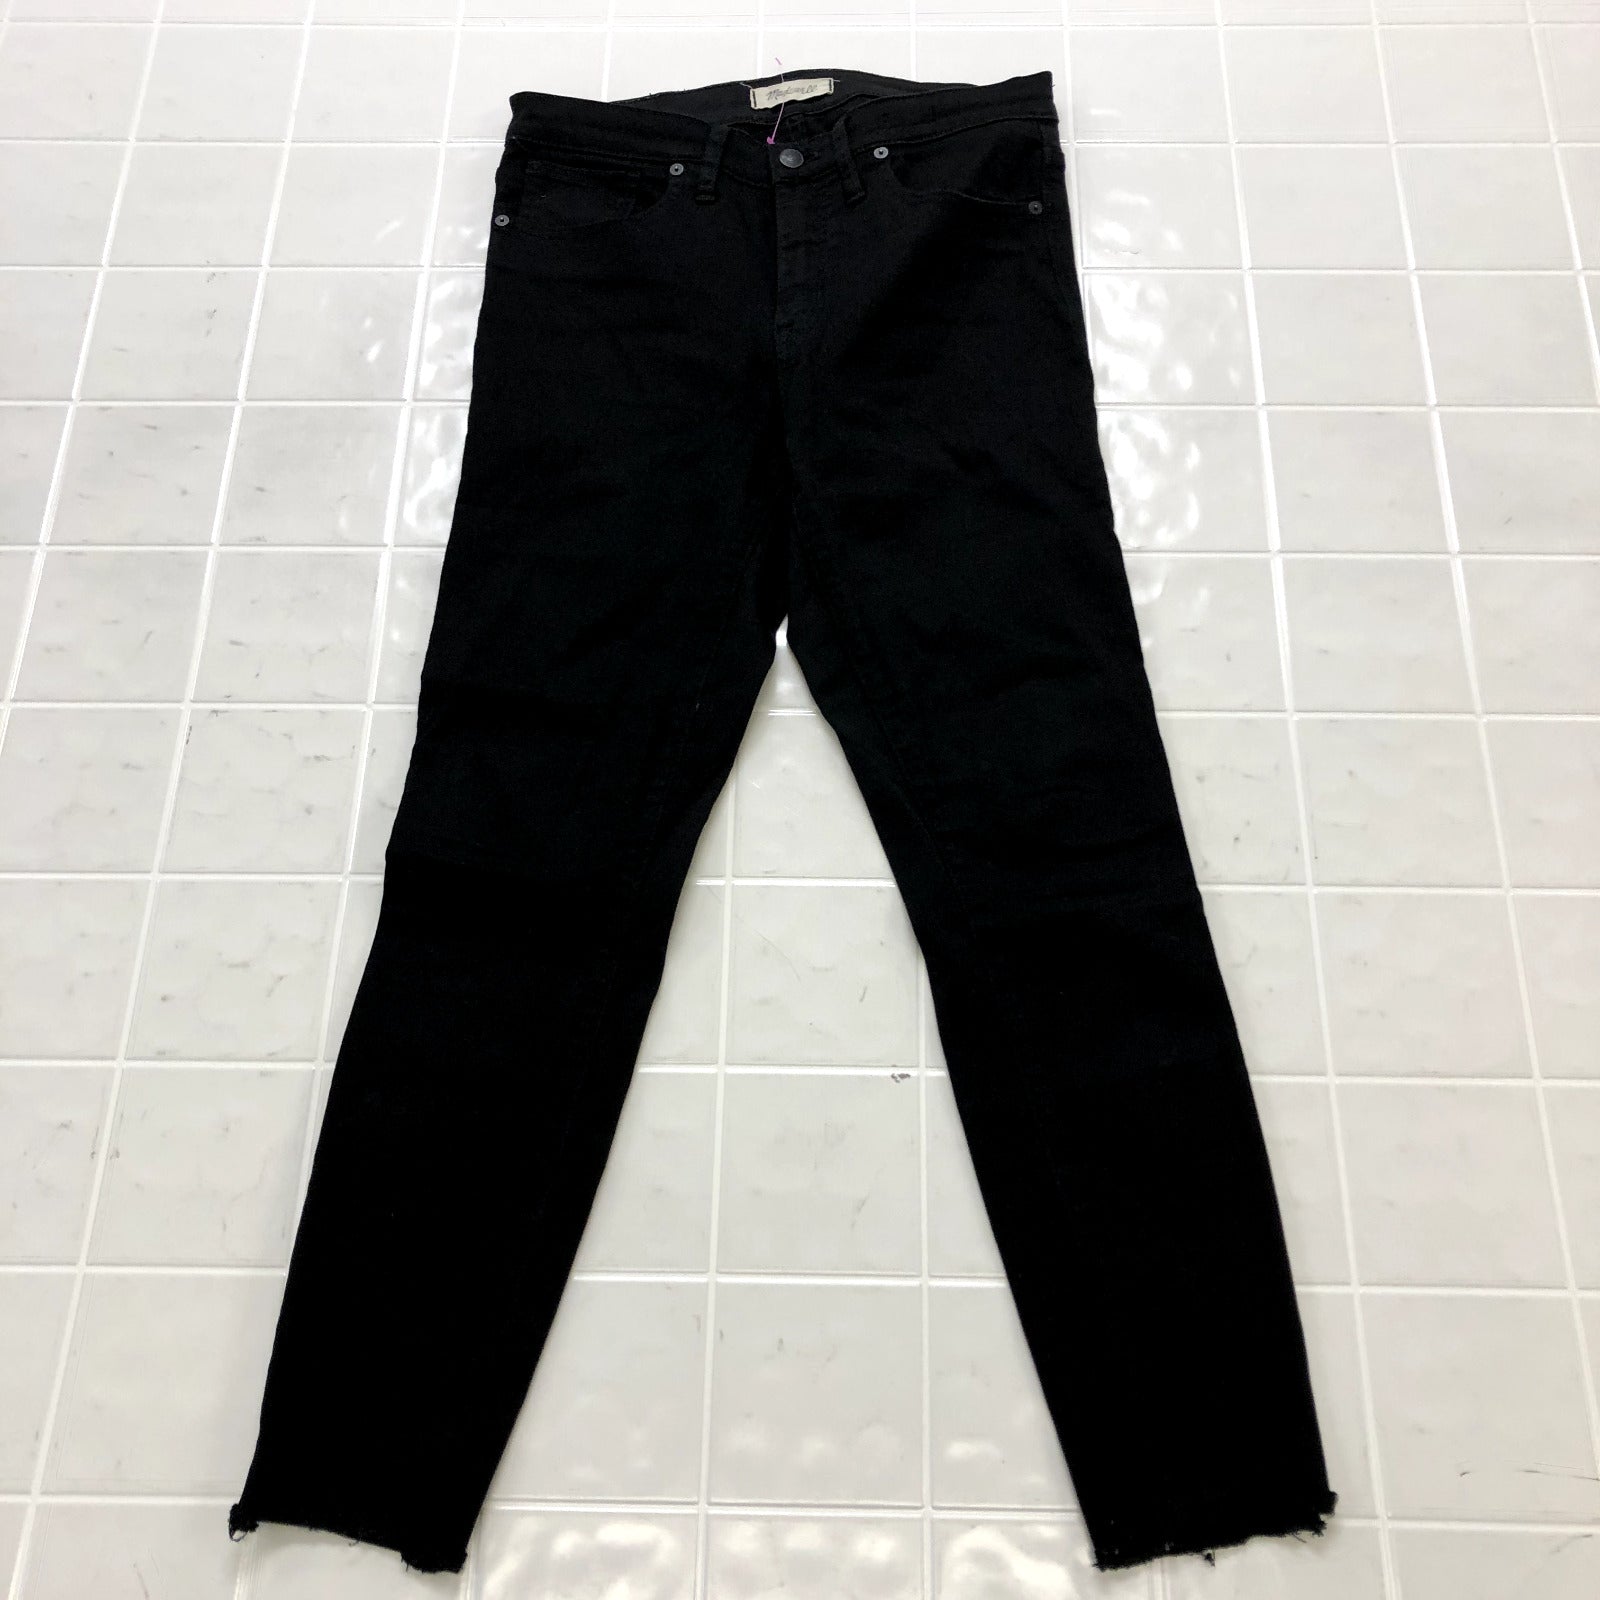 Madewell Black Denim Flat Front Chino Tapered Skinny Jeans Women's Size 29